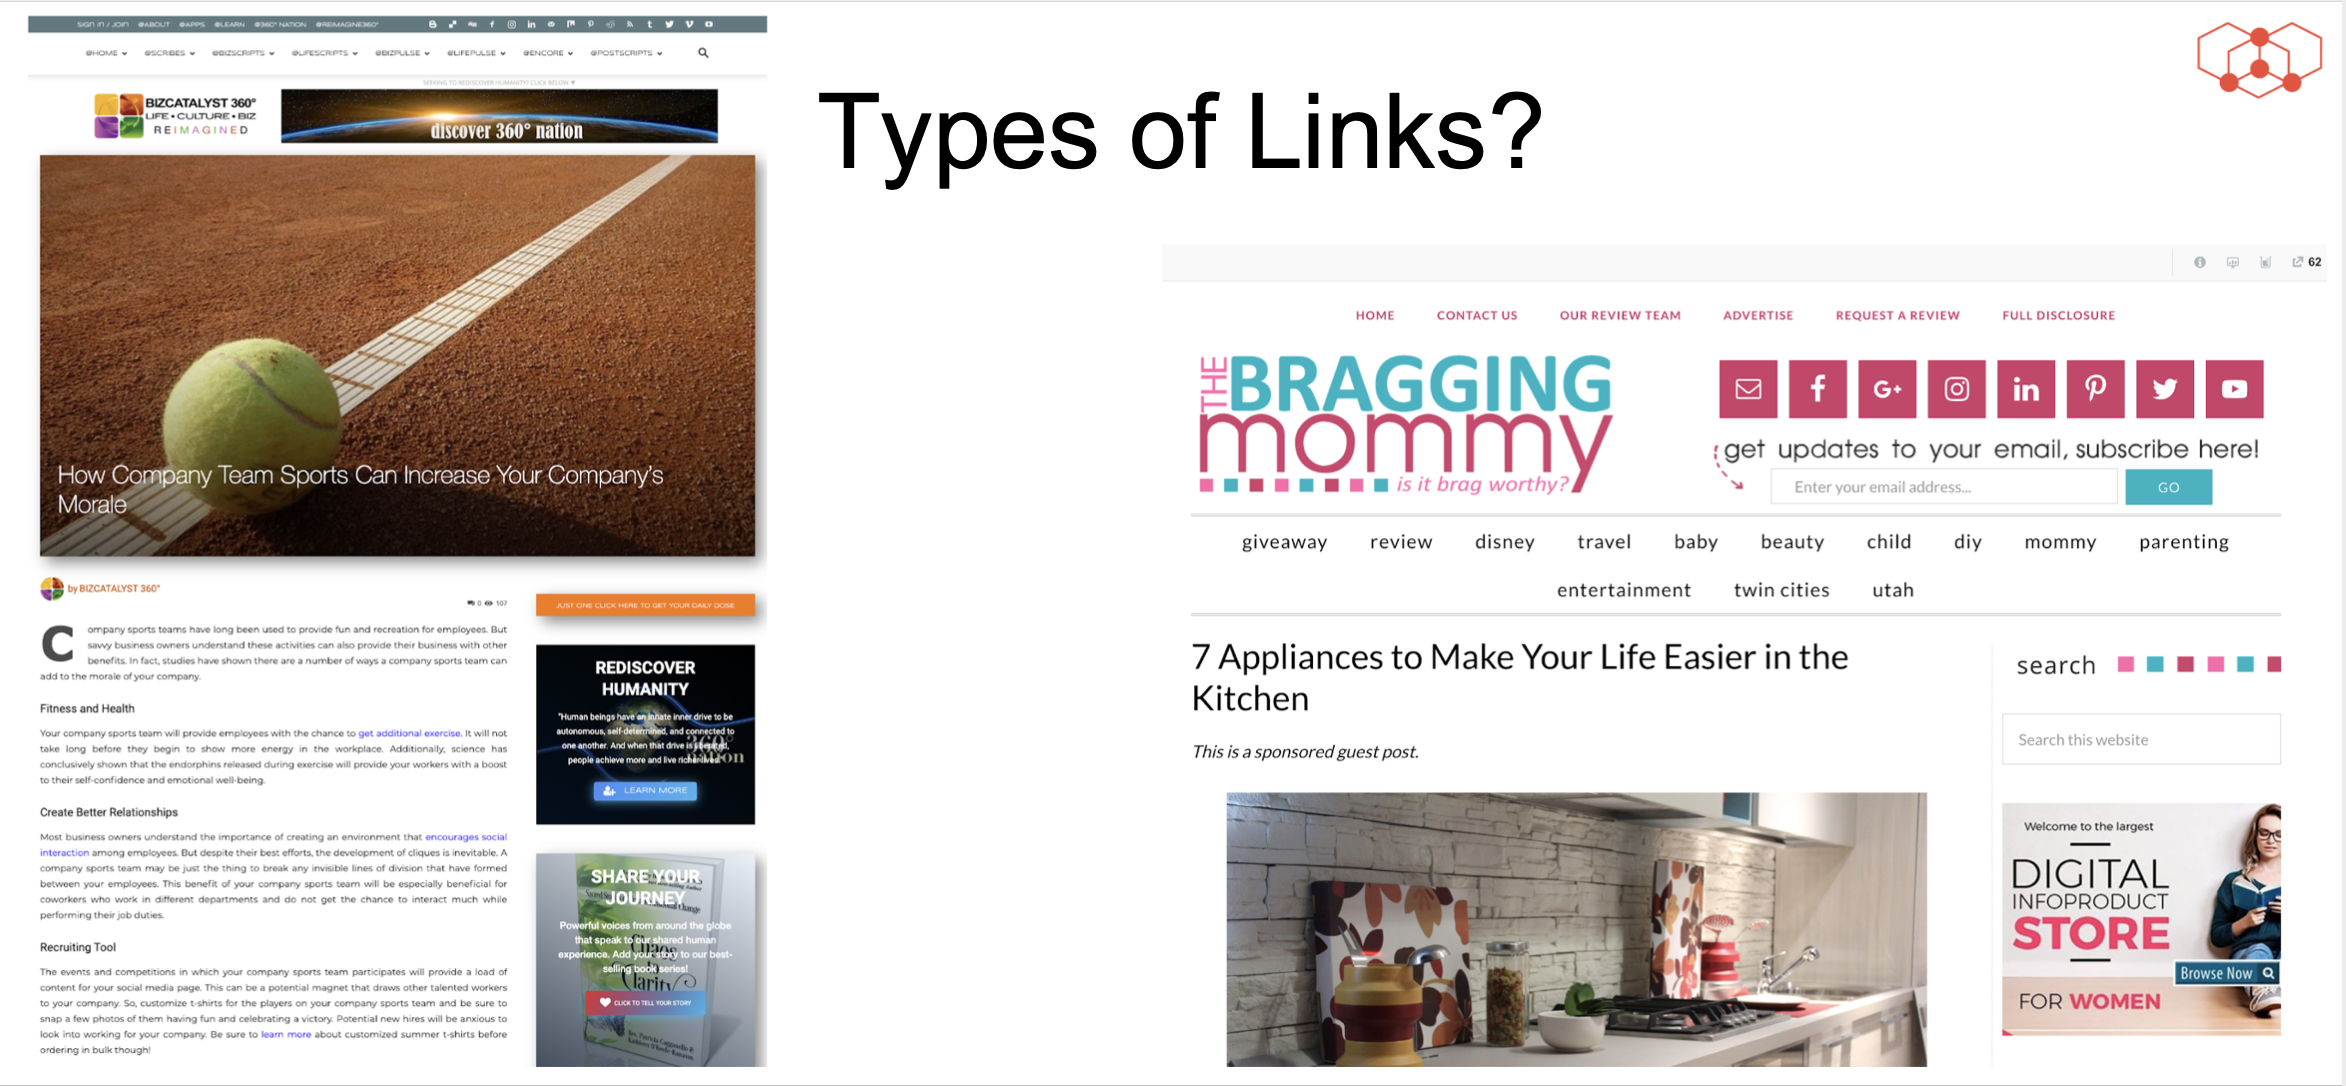 How We Built 600+ Links in 30 Days, and So Can You